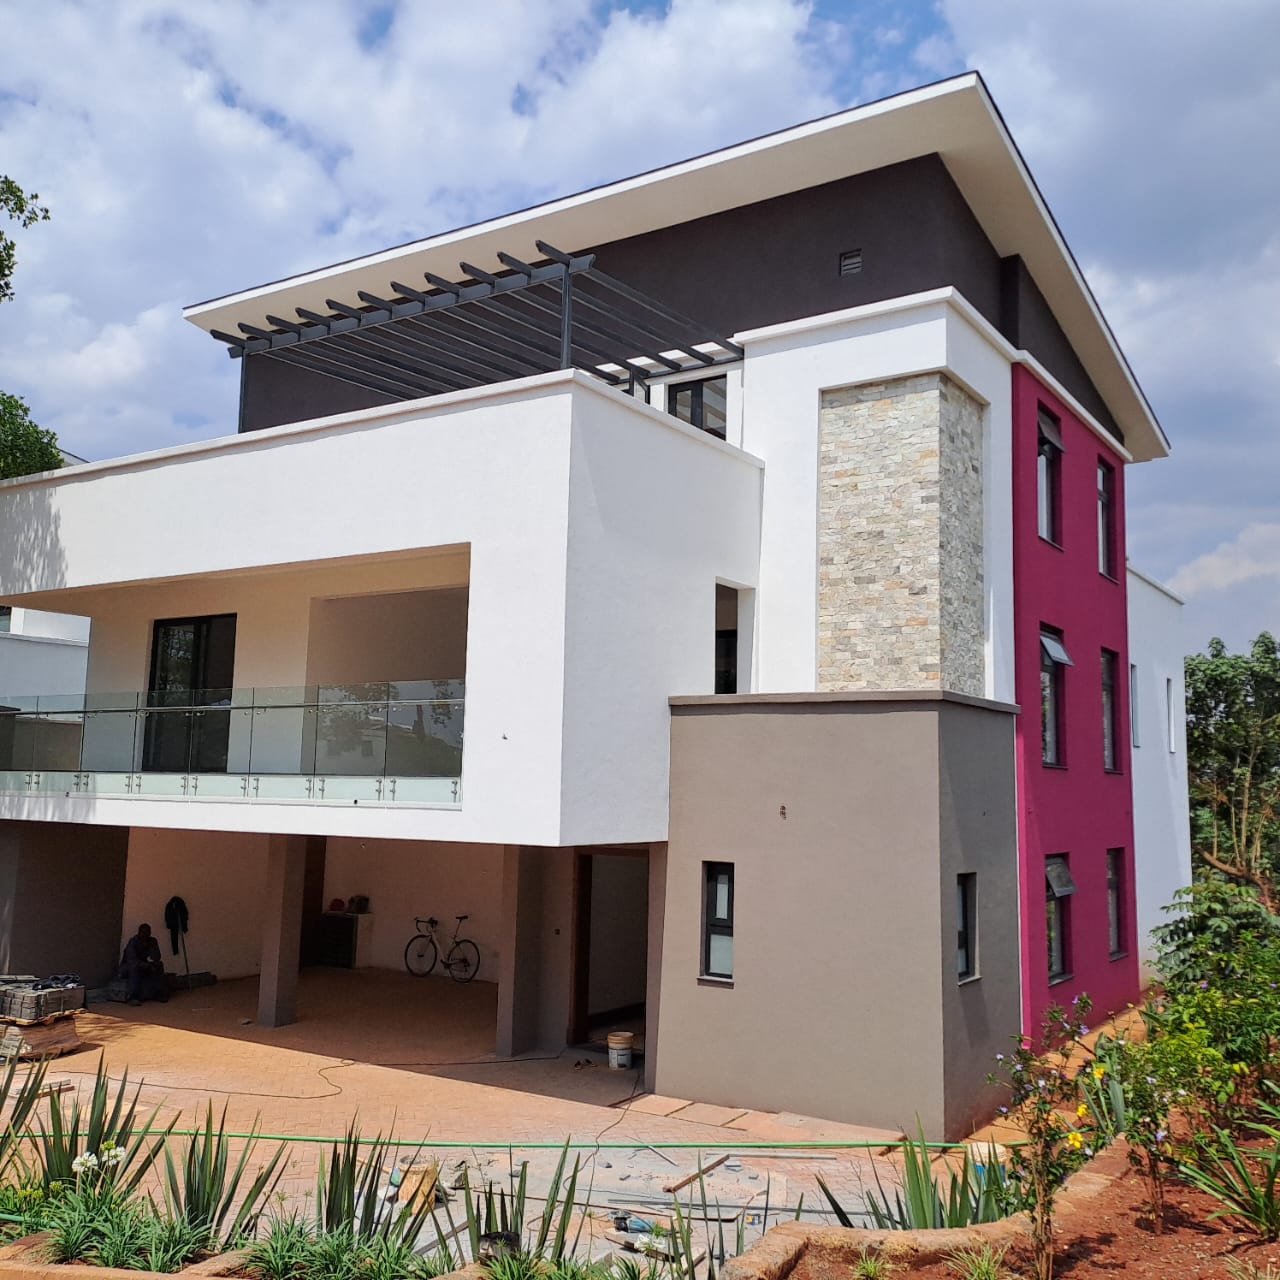 3 floor modern townhouse for sale. 5 spacious bedrooms all ensuite. Sitted on ¼ acre. 💰 selling price - 125M Musilli Homes Pam Golding Hass Consult. GTC. Eighty Eighty Nairobi.